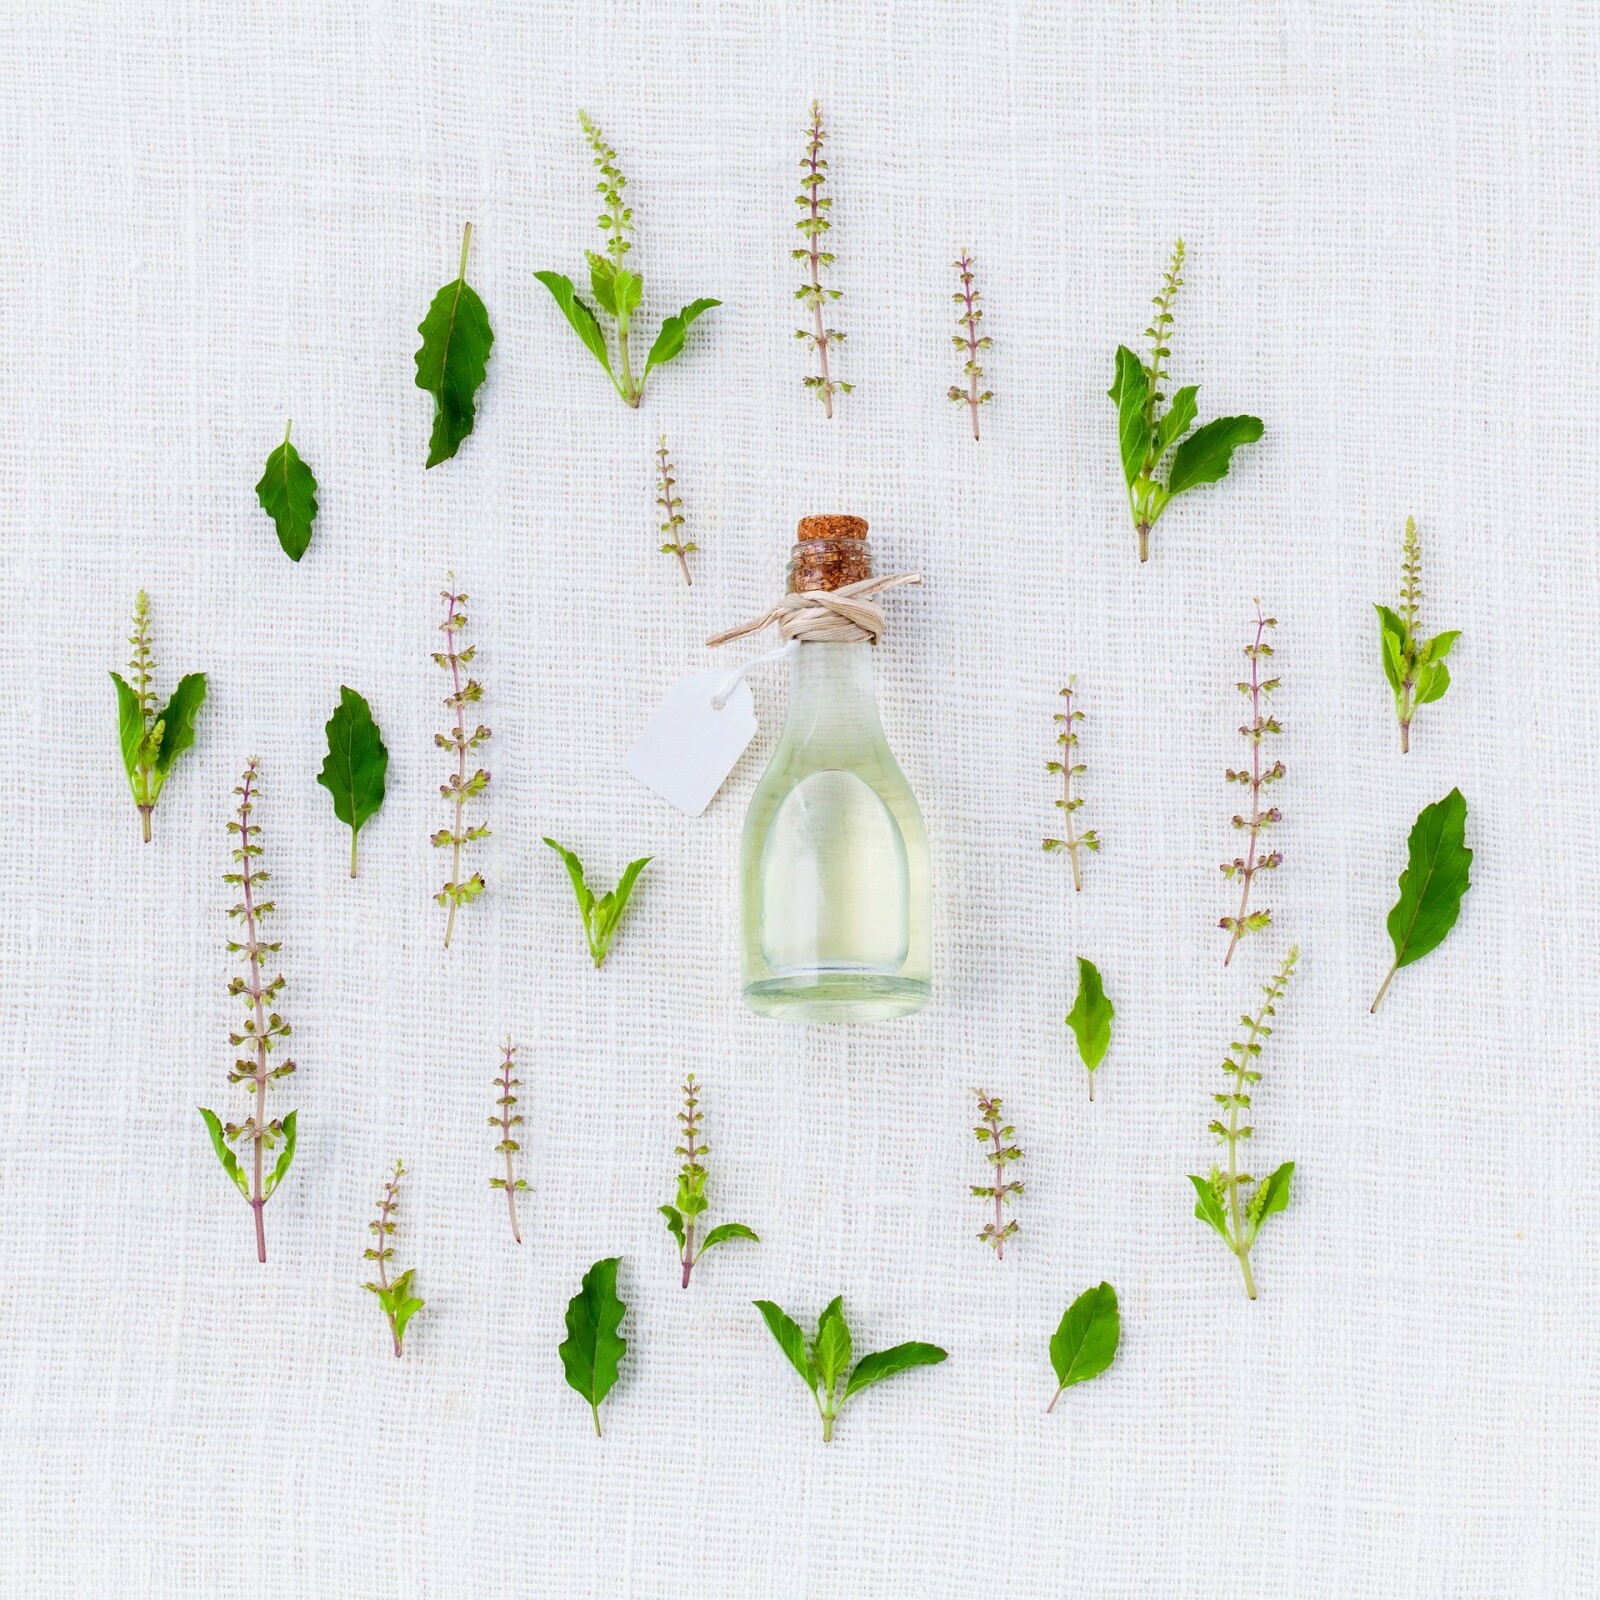 Tips on Using Essential Oils